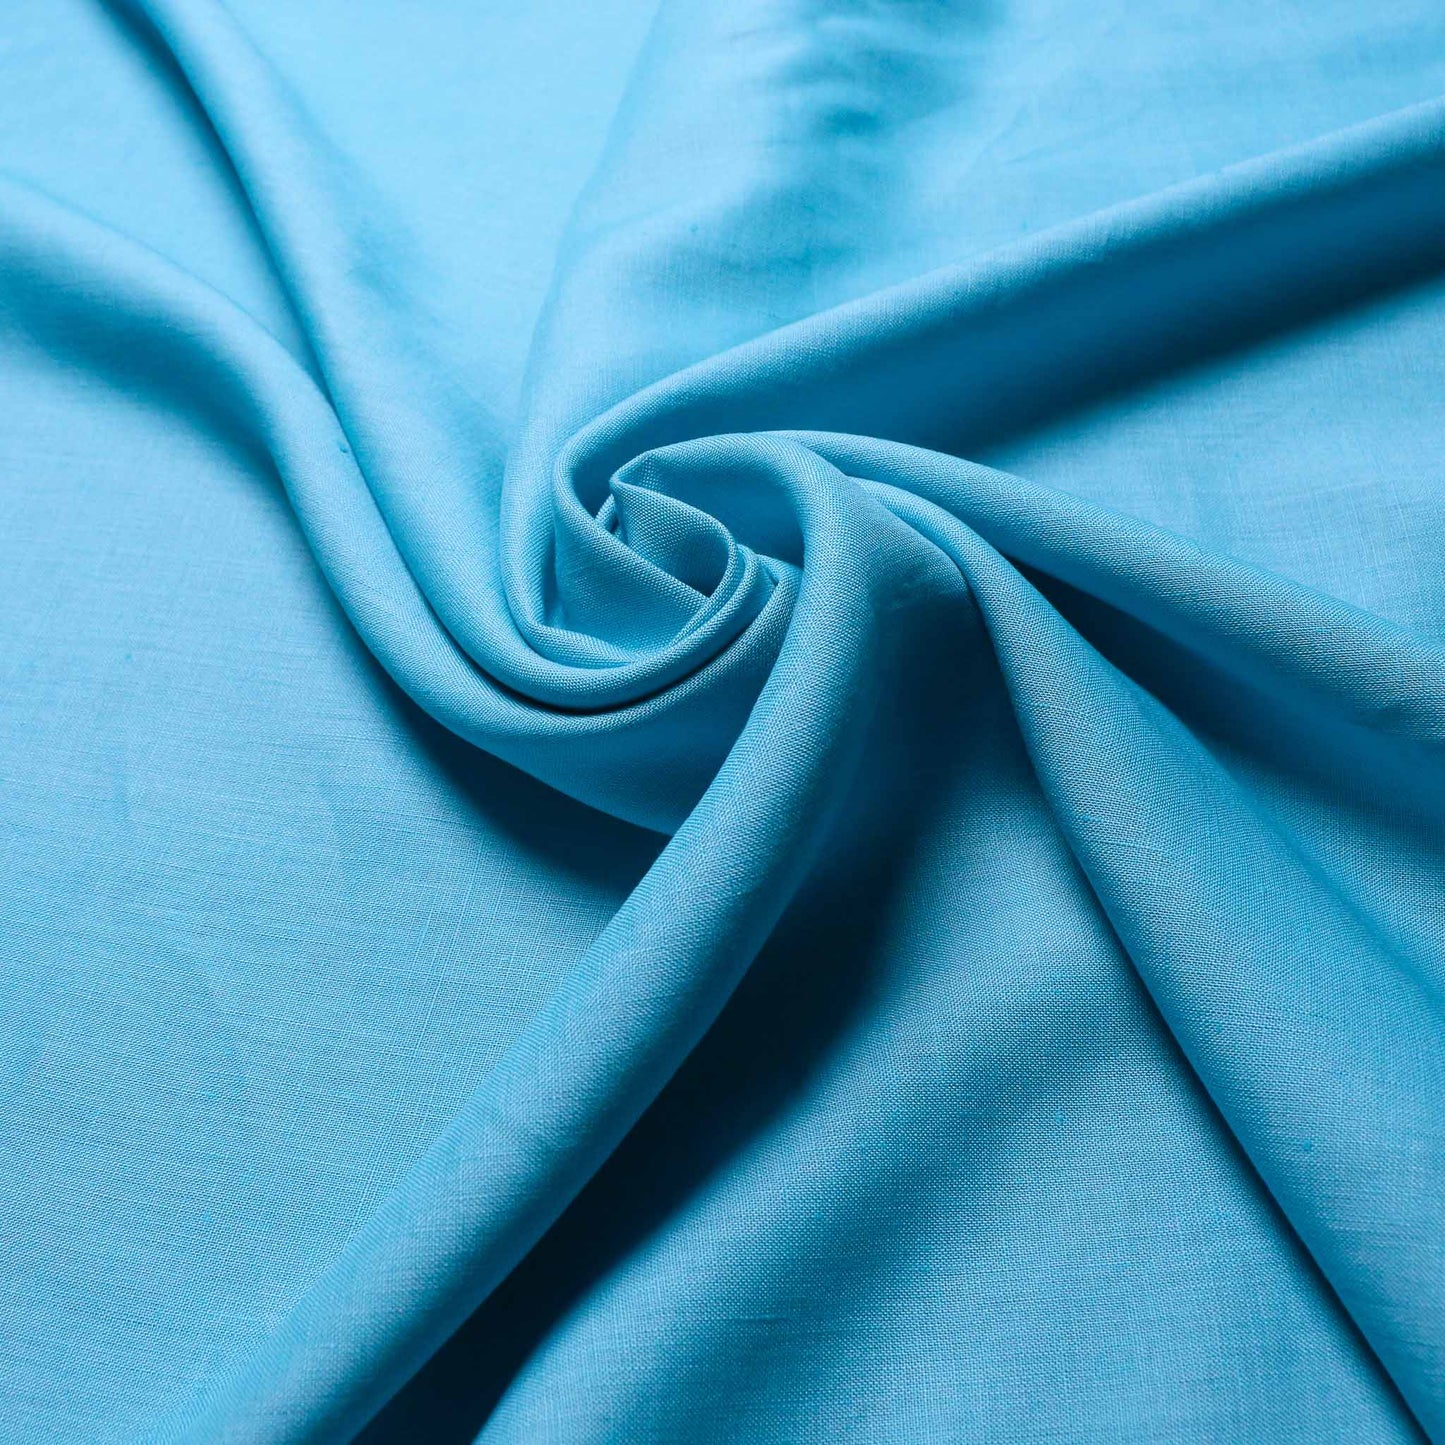 Pastel teal viscose cotton fabric for dressmaking